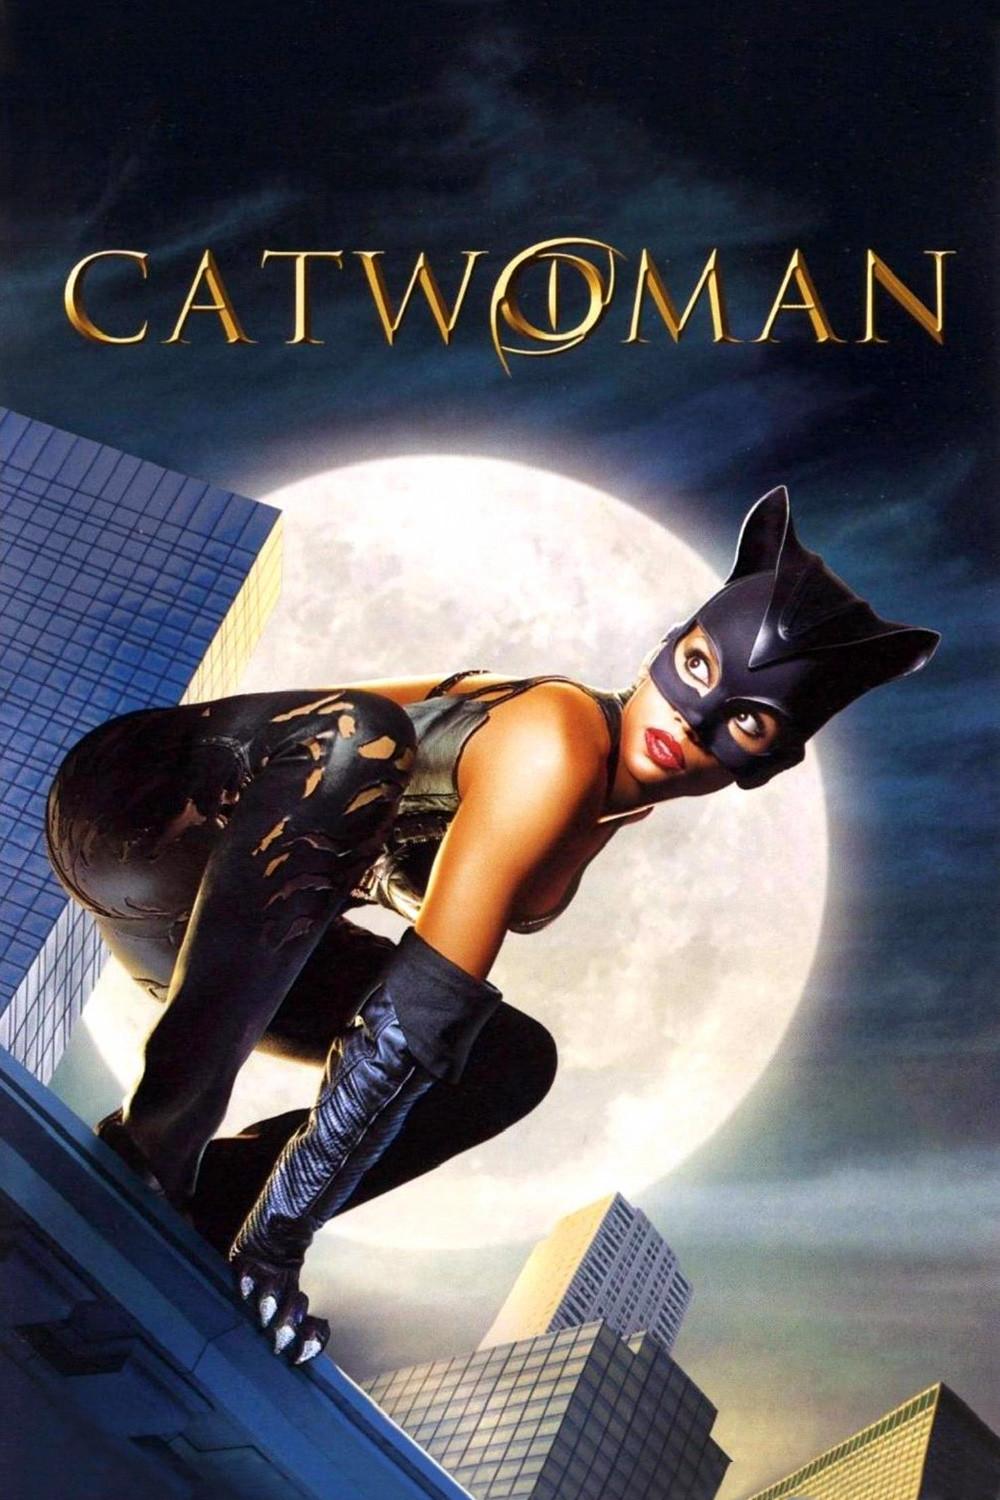 Catwoman-2004-Hindi-Dubbed-Movie-Watch-Online.jpg